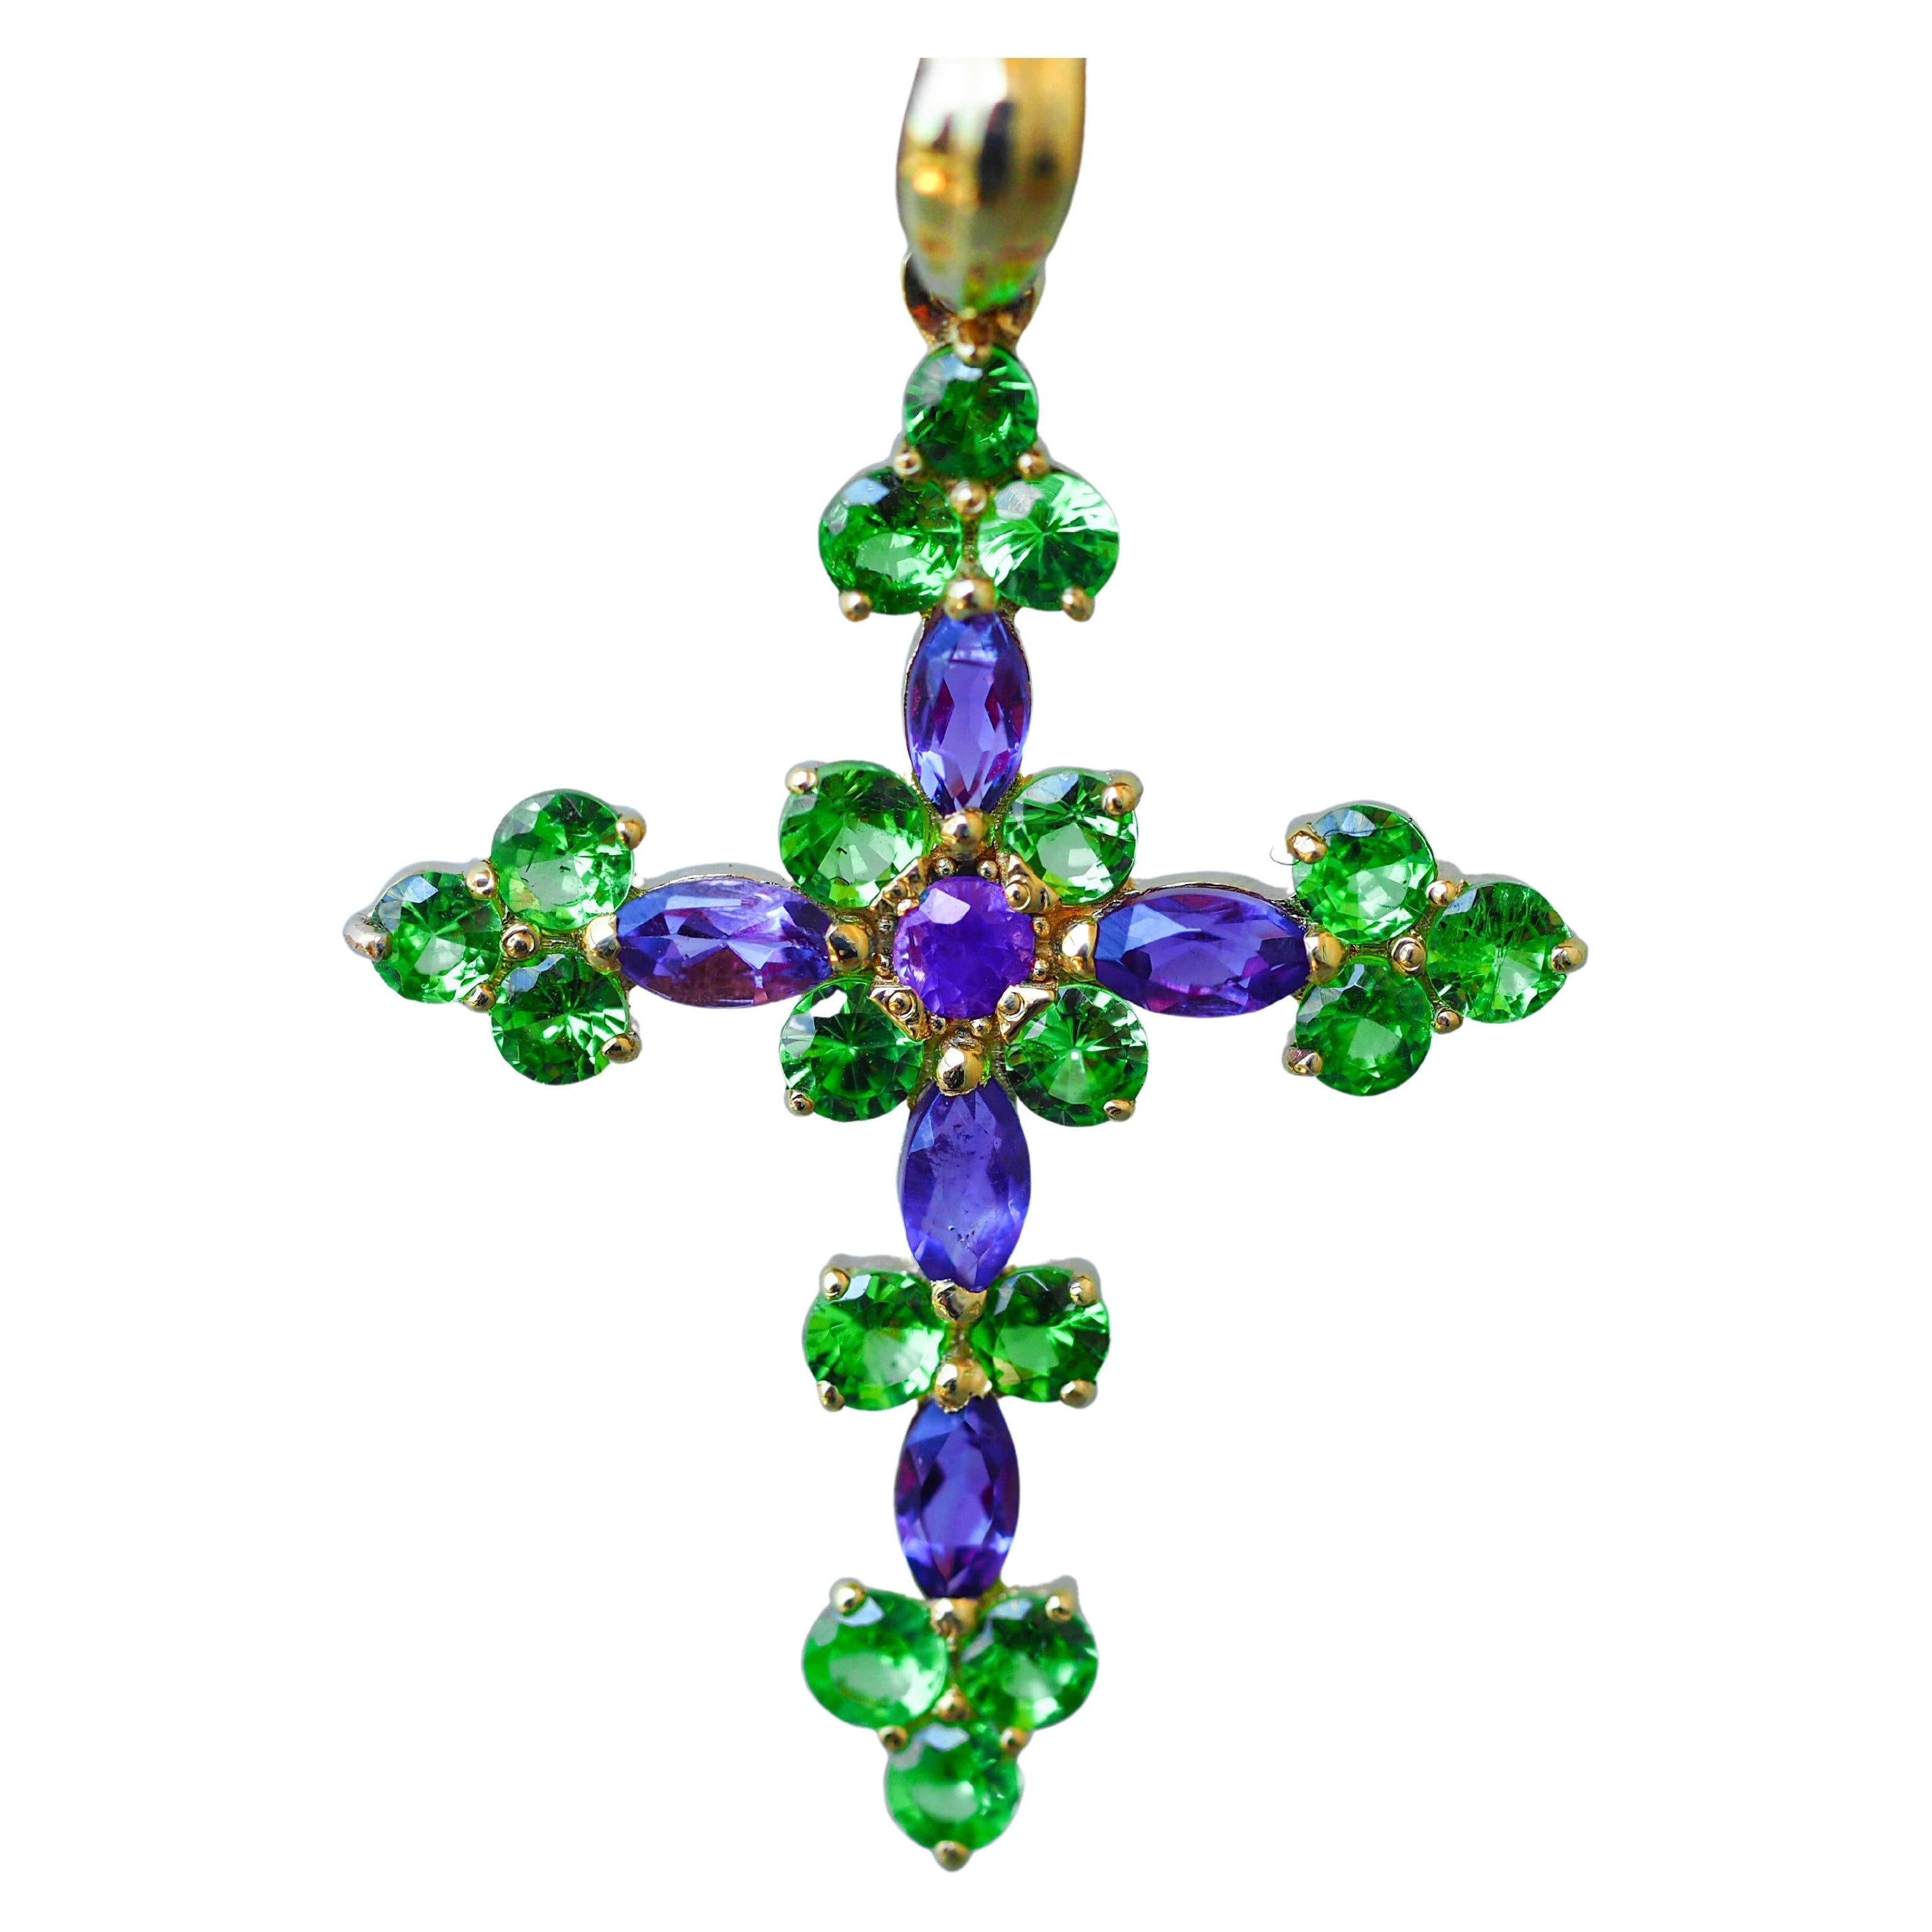 14k Gold Cross Pendant with Colored Stones: Amethysts and Tsavorites! For Sale